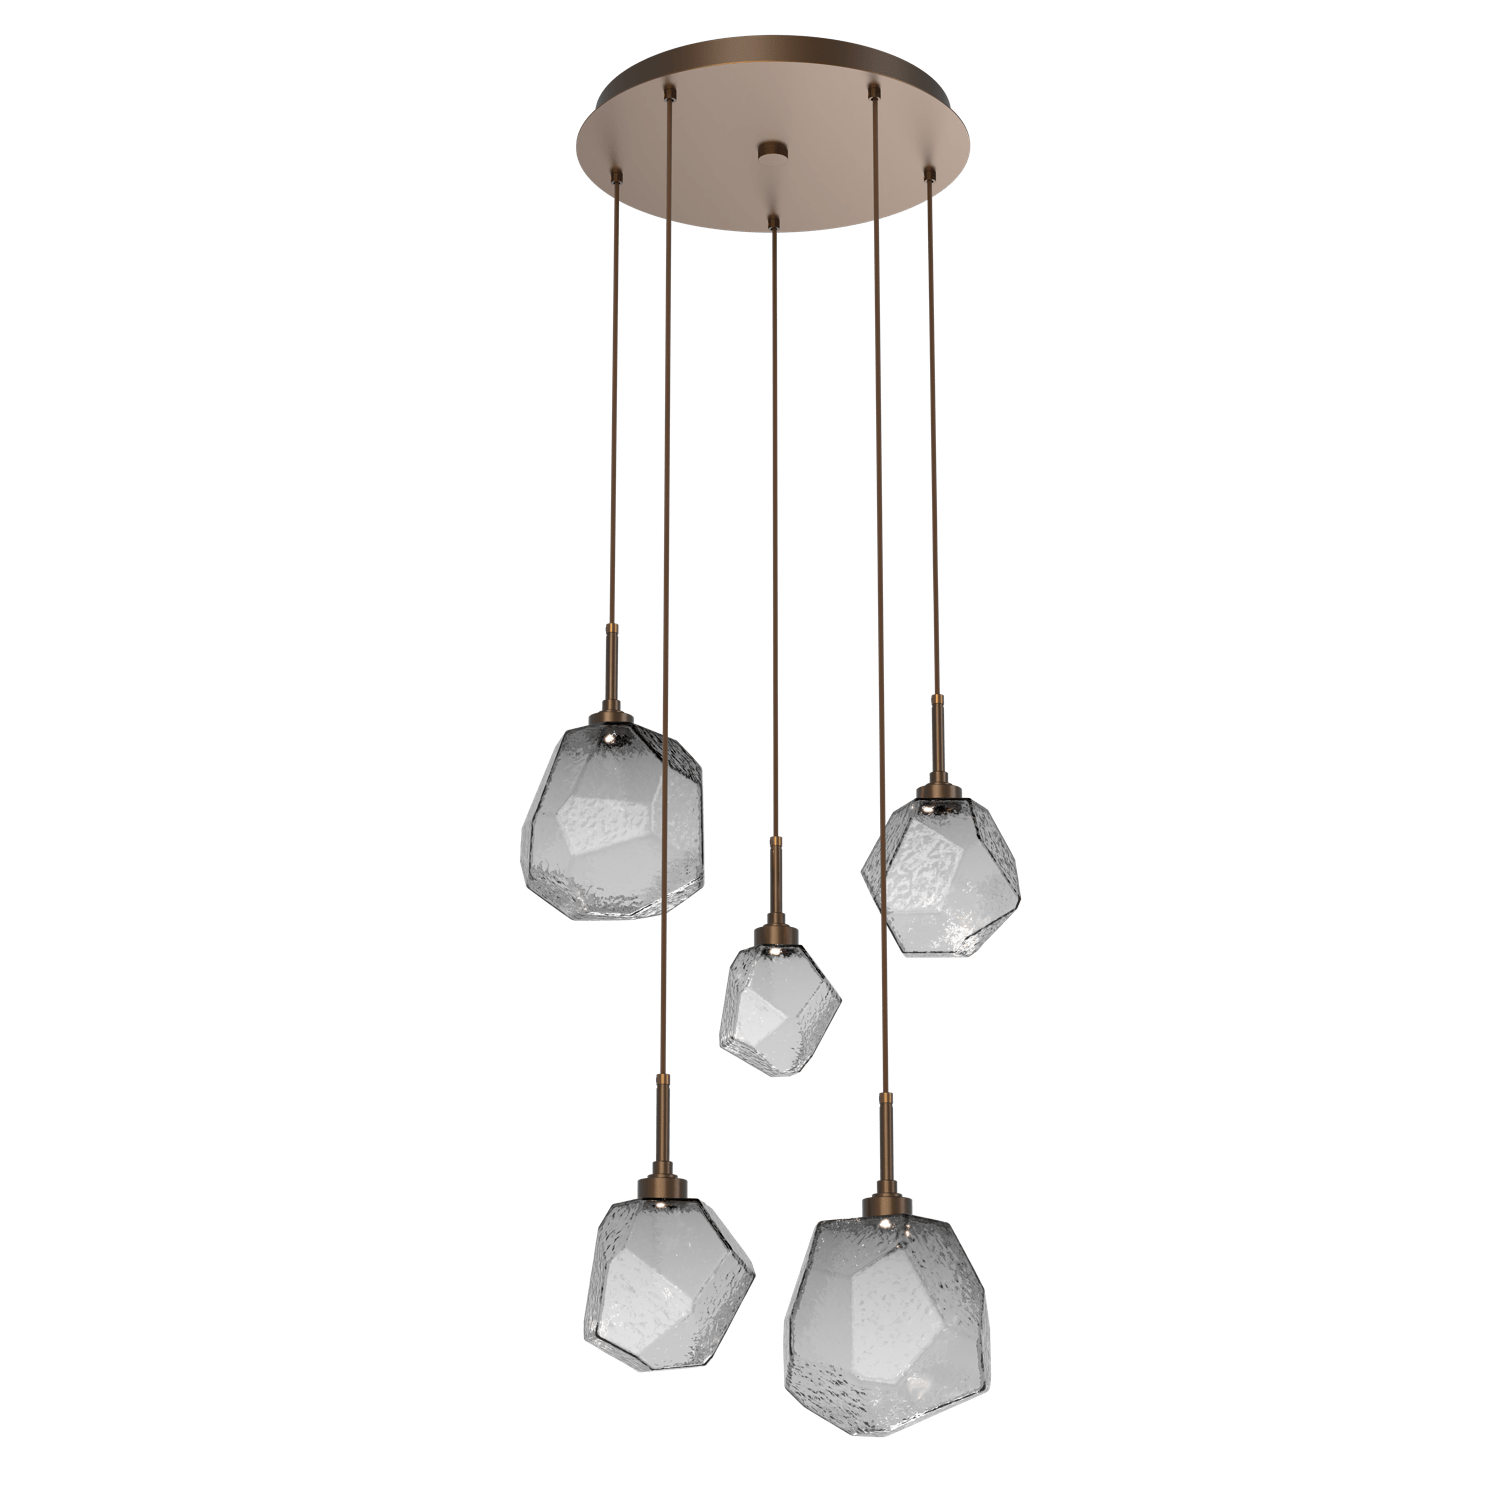 CHB0039-05-FB-S-Hammerton-Studio-Gem-5-light-round-pendant-chandelier-with-flat-bronze-finish-and-smoke-blown-glass-shades-and-LED-lamping